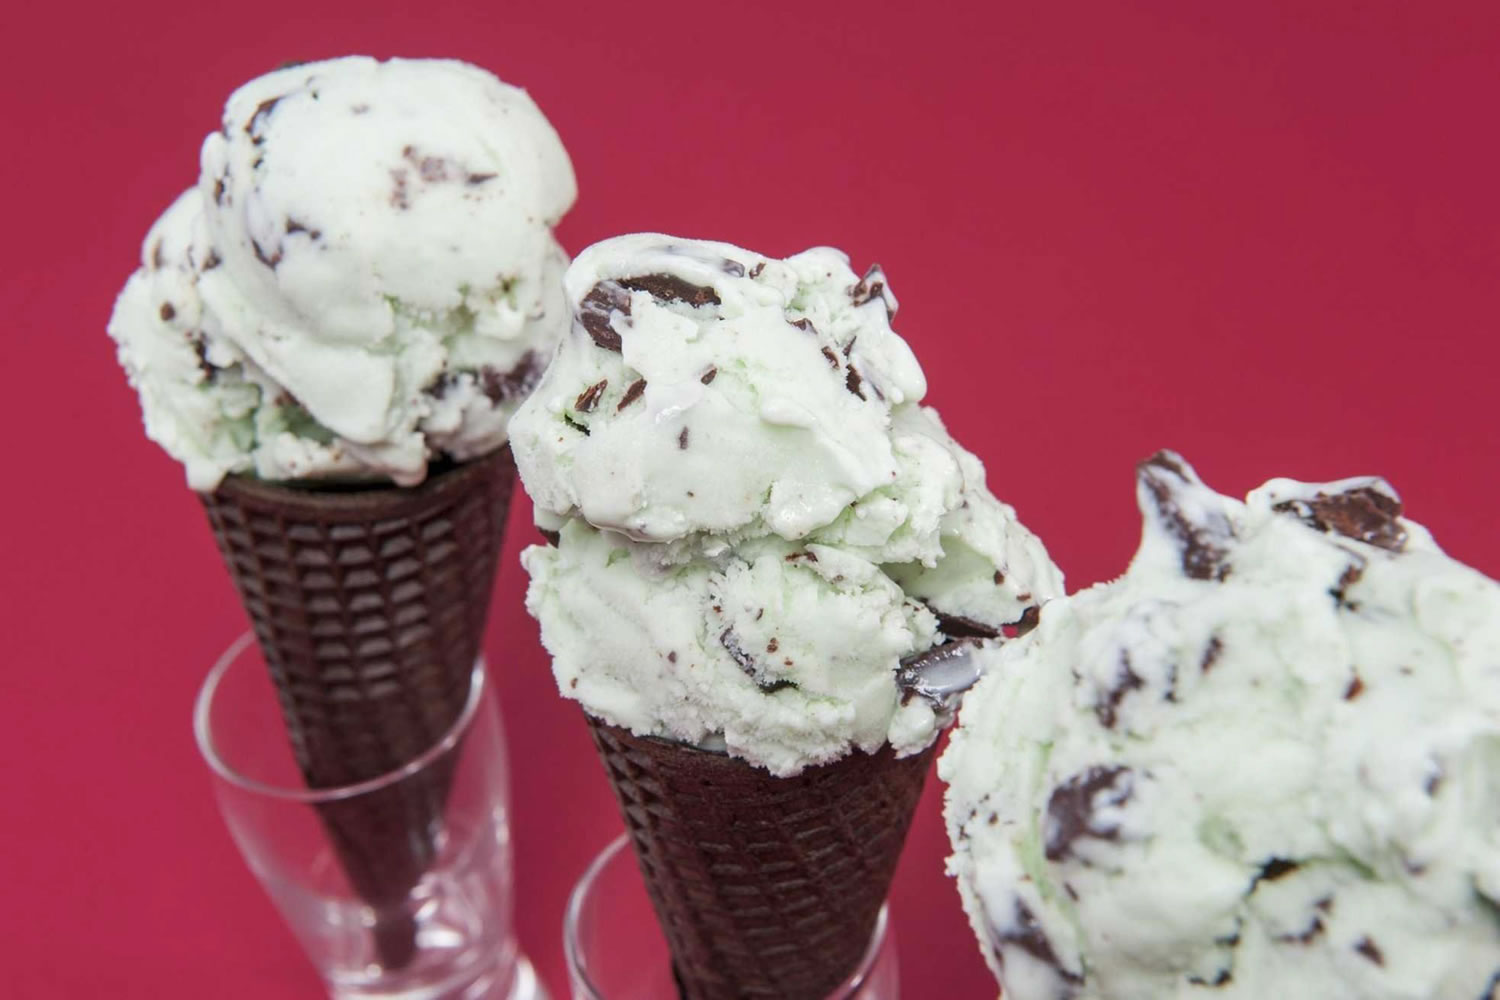 Frozen yogurt, such as this Mint-Chocolate Chunk, is a quick and easy at-home summer dessert.